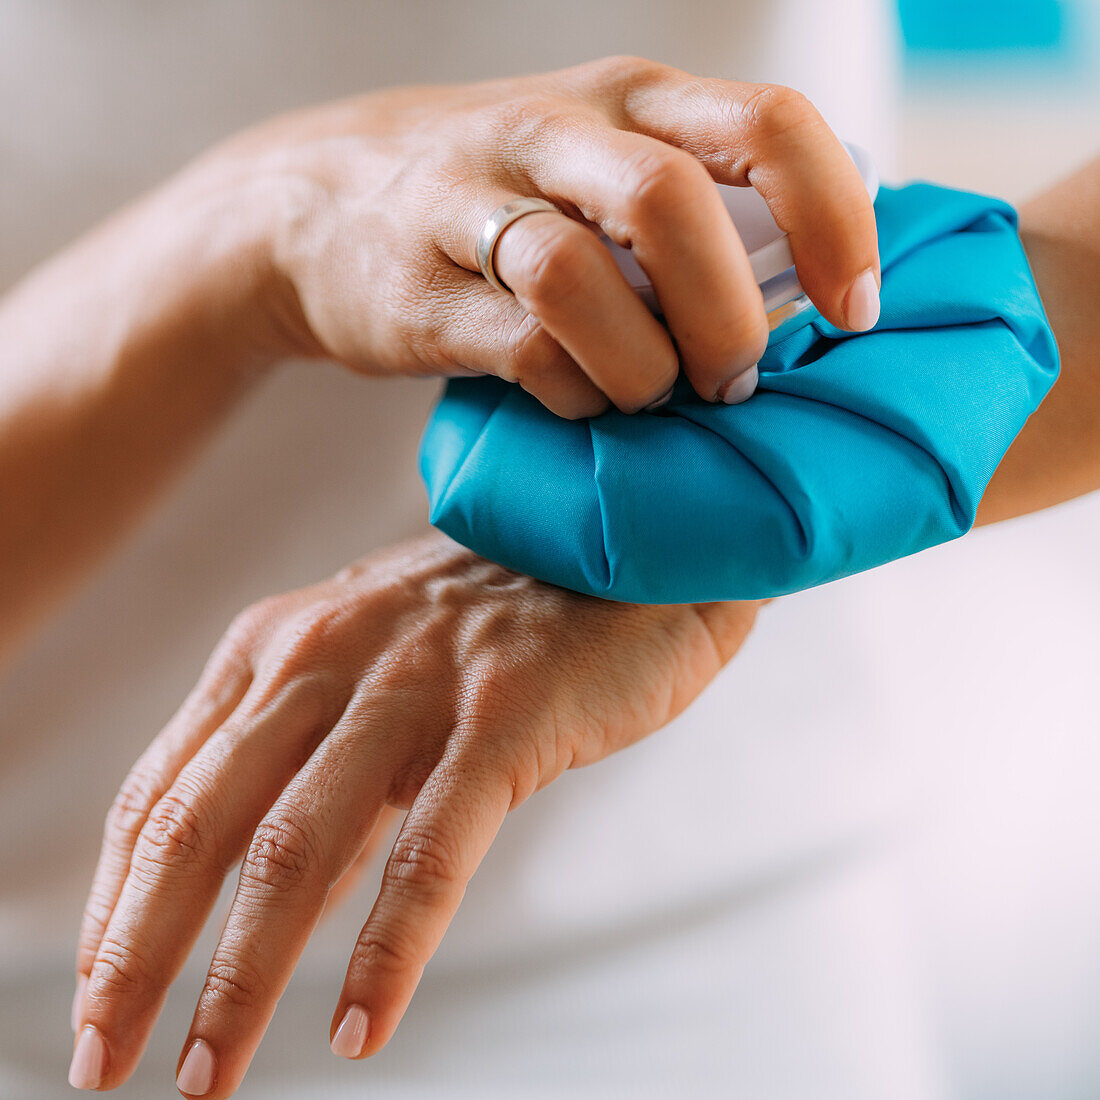 Woman holding ice bag compress on a painful wrist